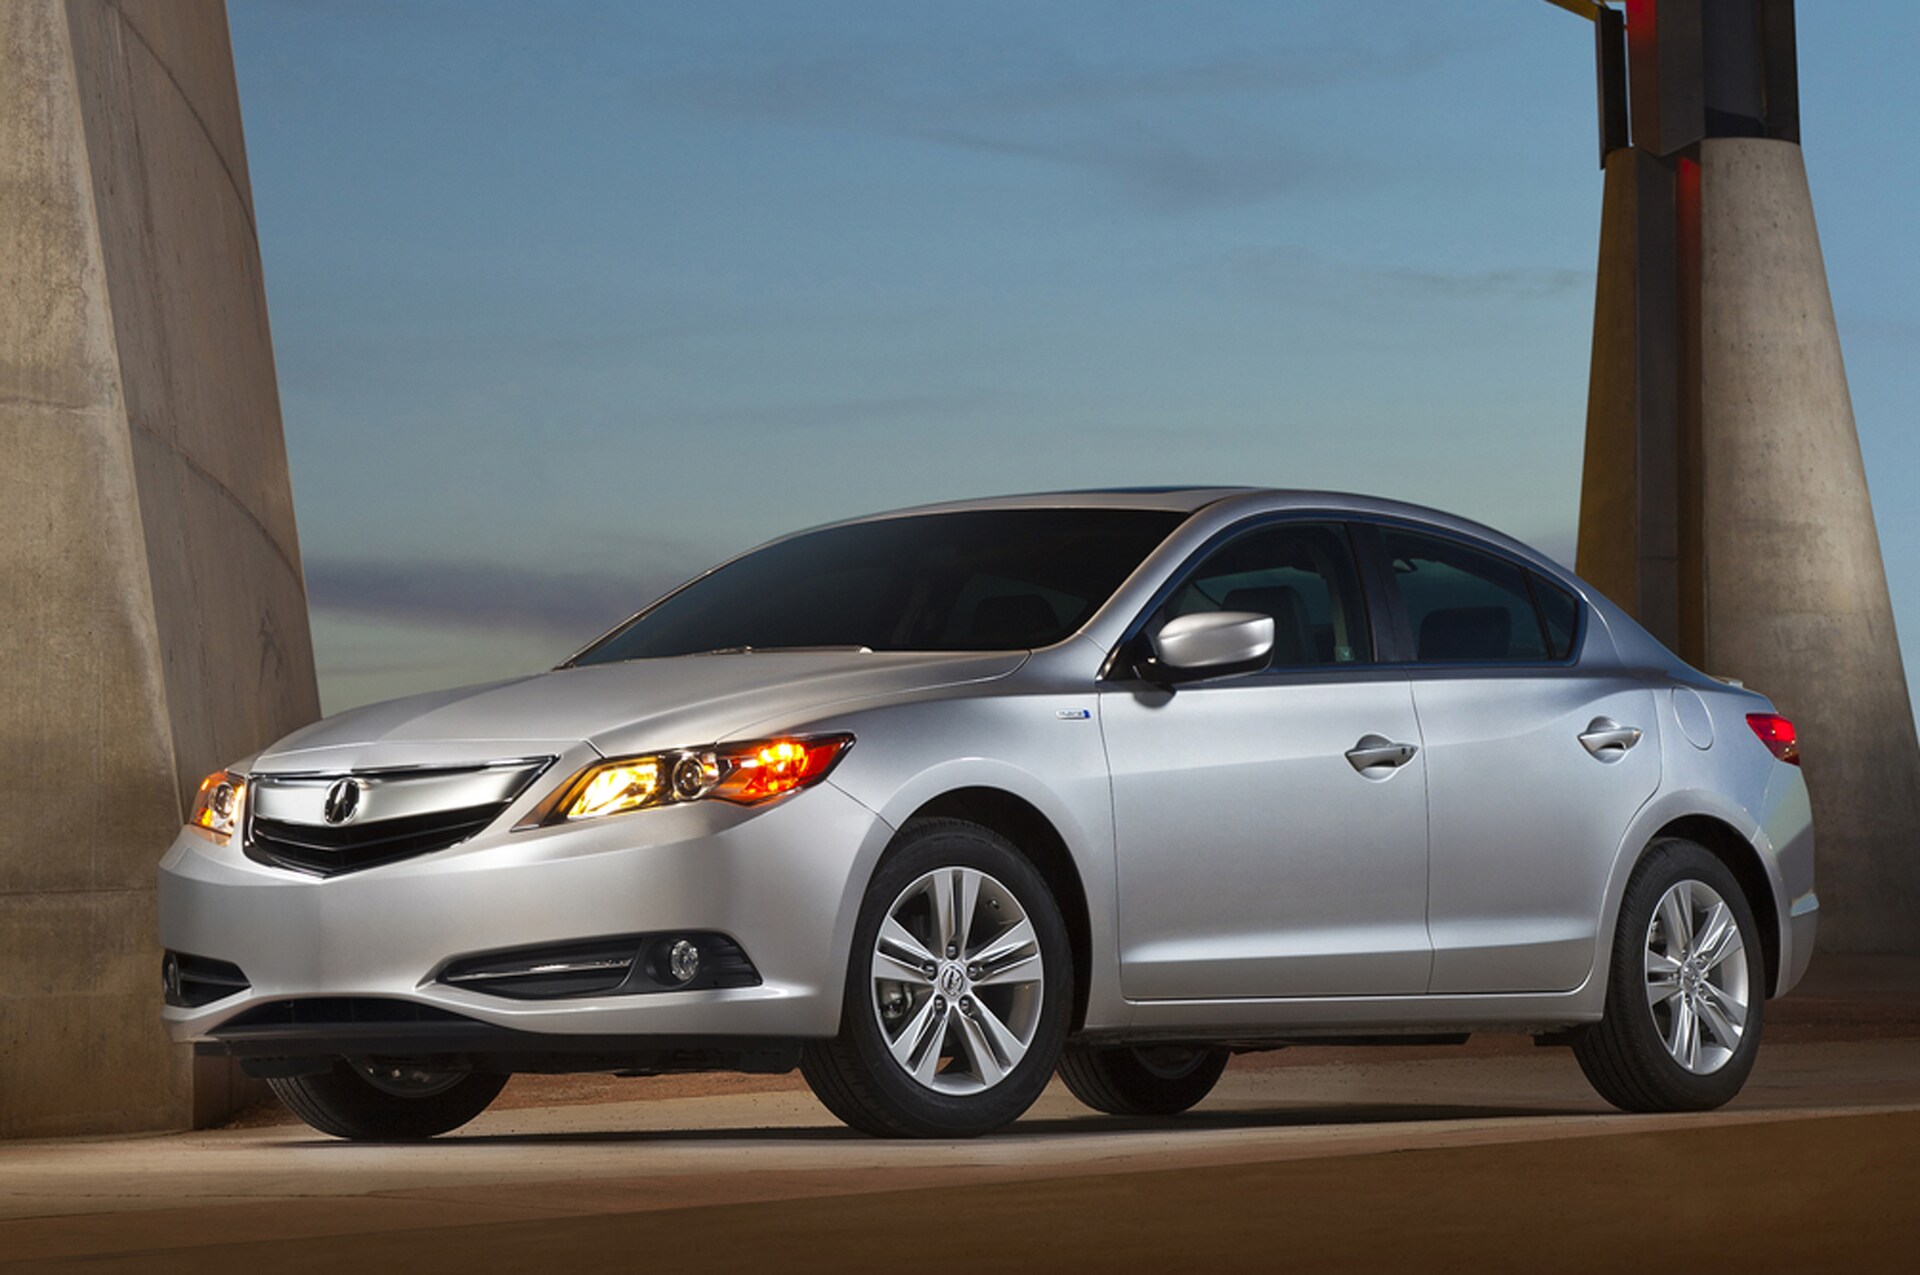 2014 Acura ILX Hybrid Priced at $29,795, Tech Package at $35,495